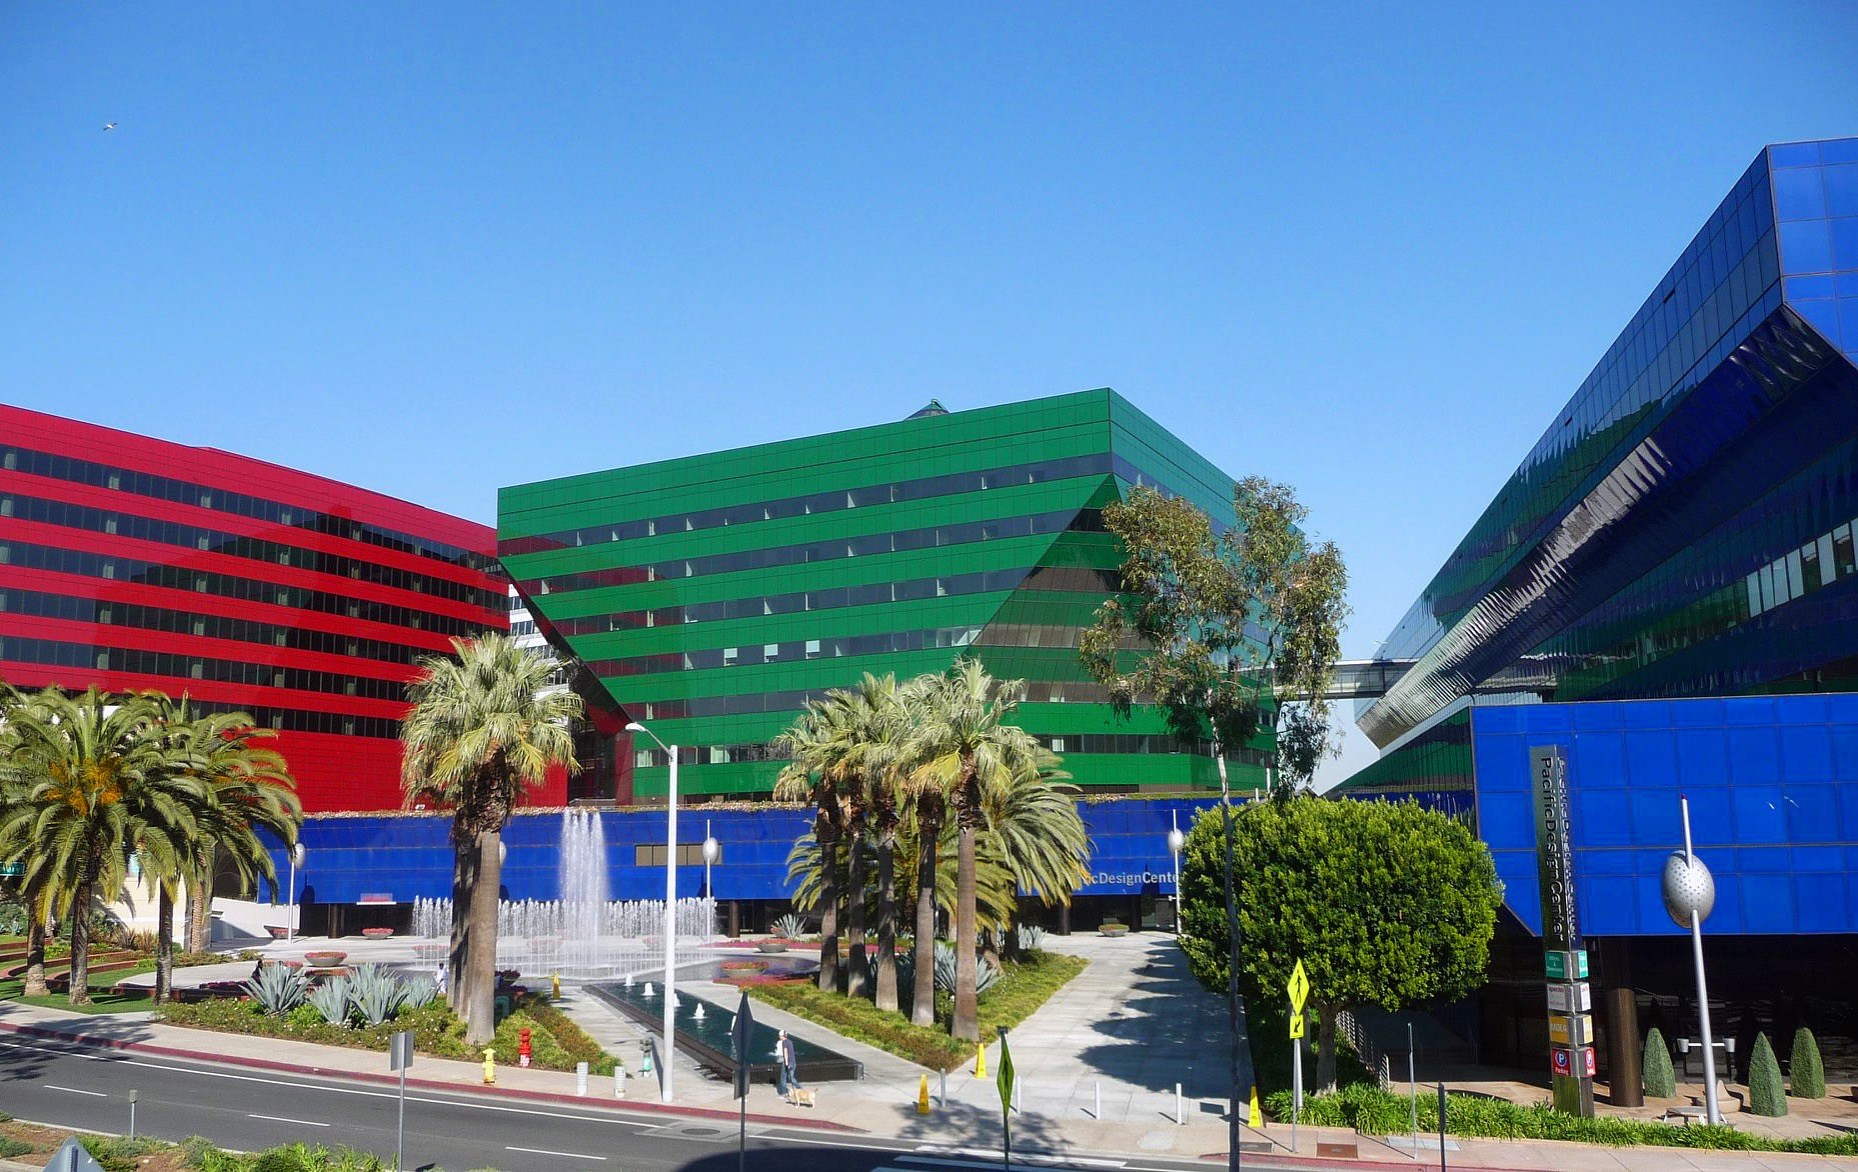 The red, green and blue buildings that make up the Pacific Design Center. The Blue Whale as it is known to locals.